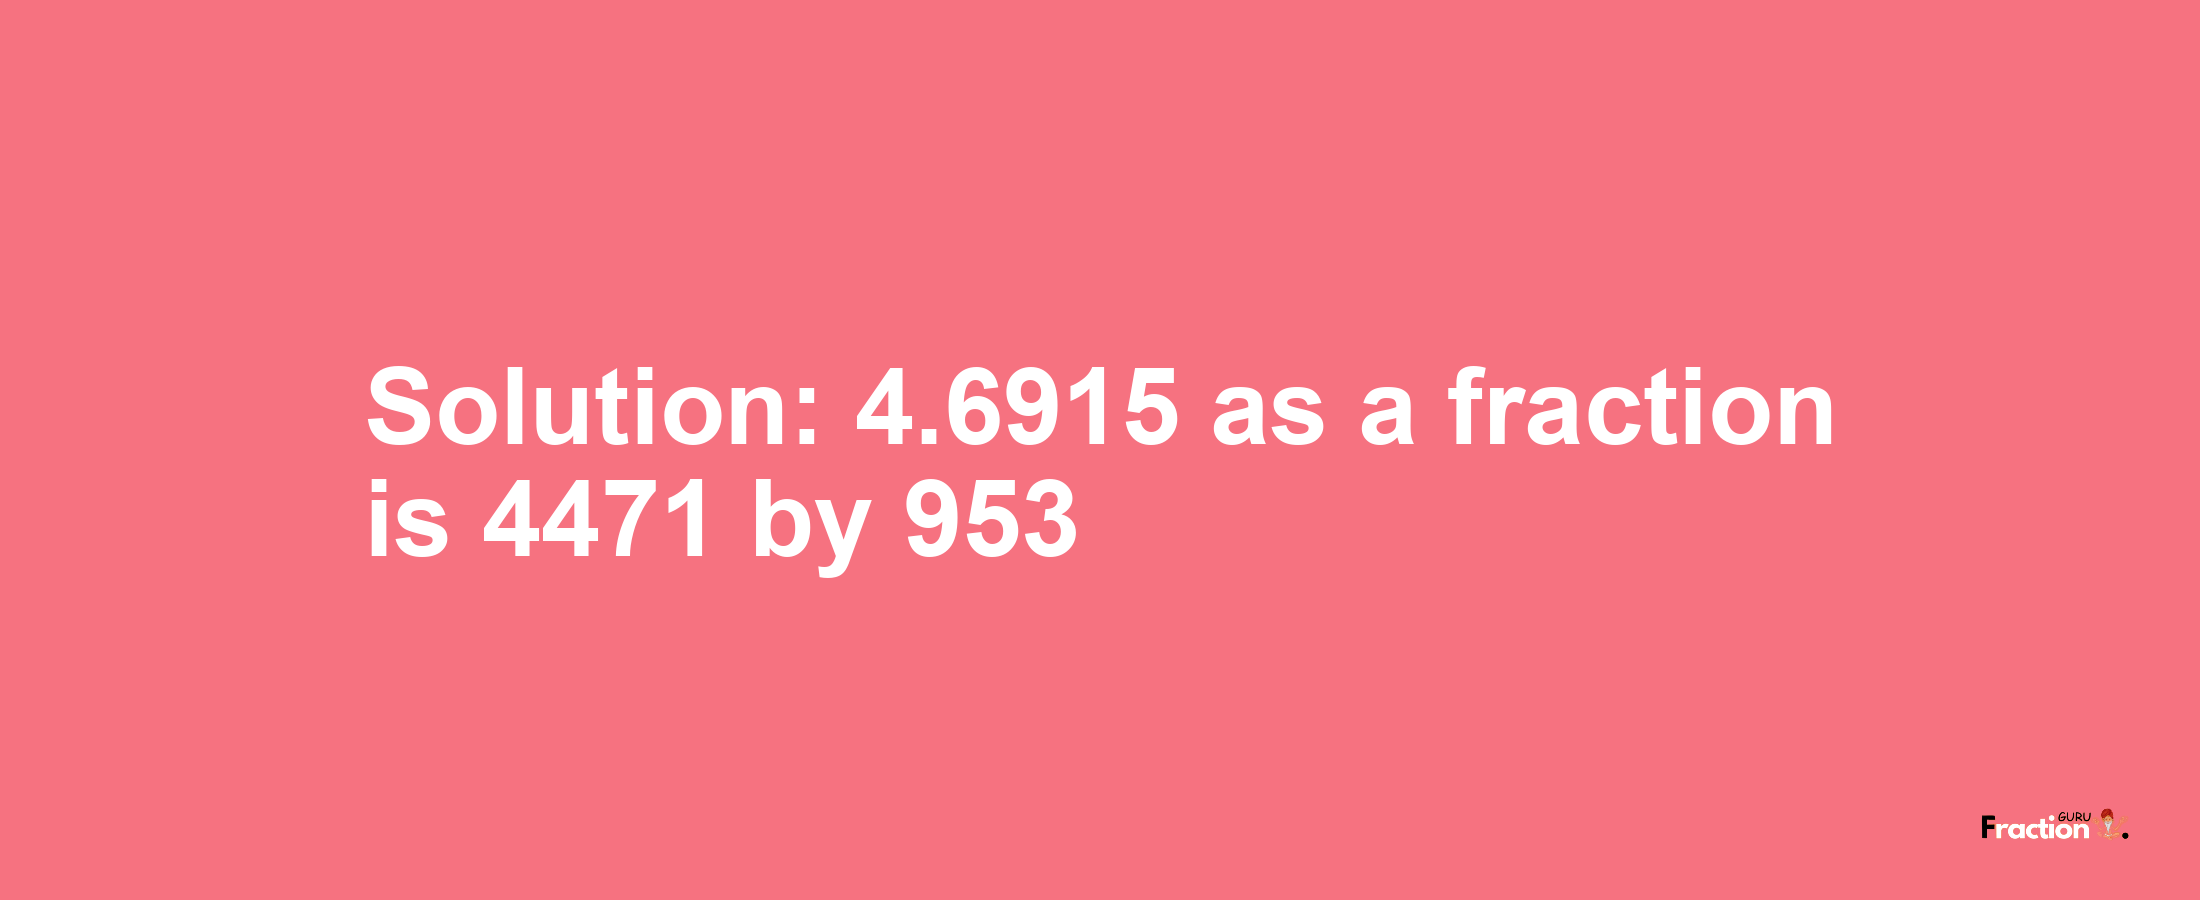 Solution:4.6915 as a fraction is 4471/953